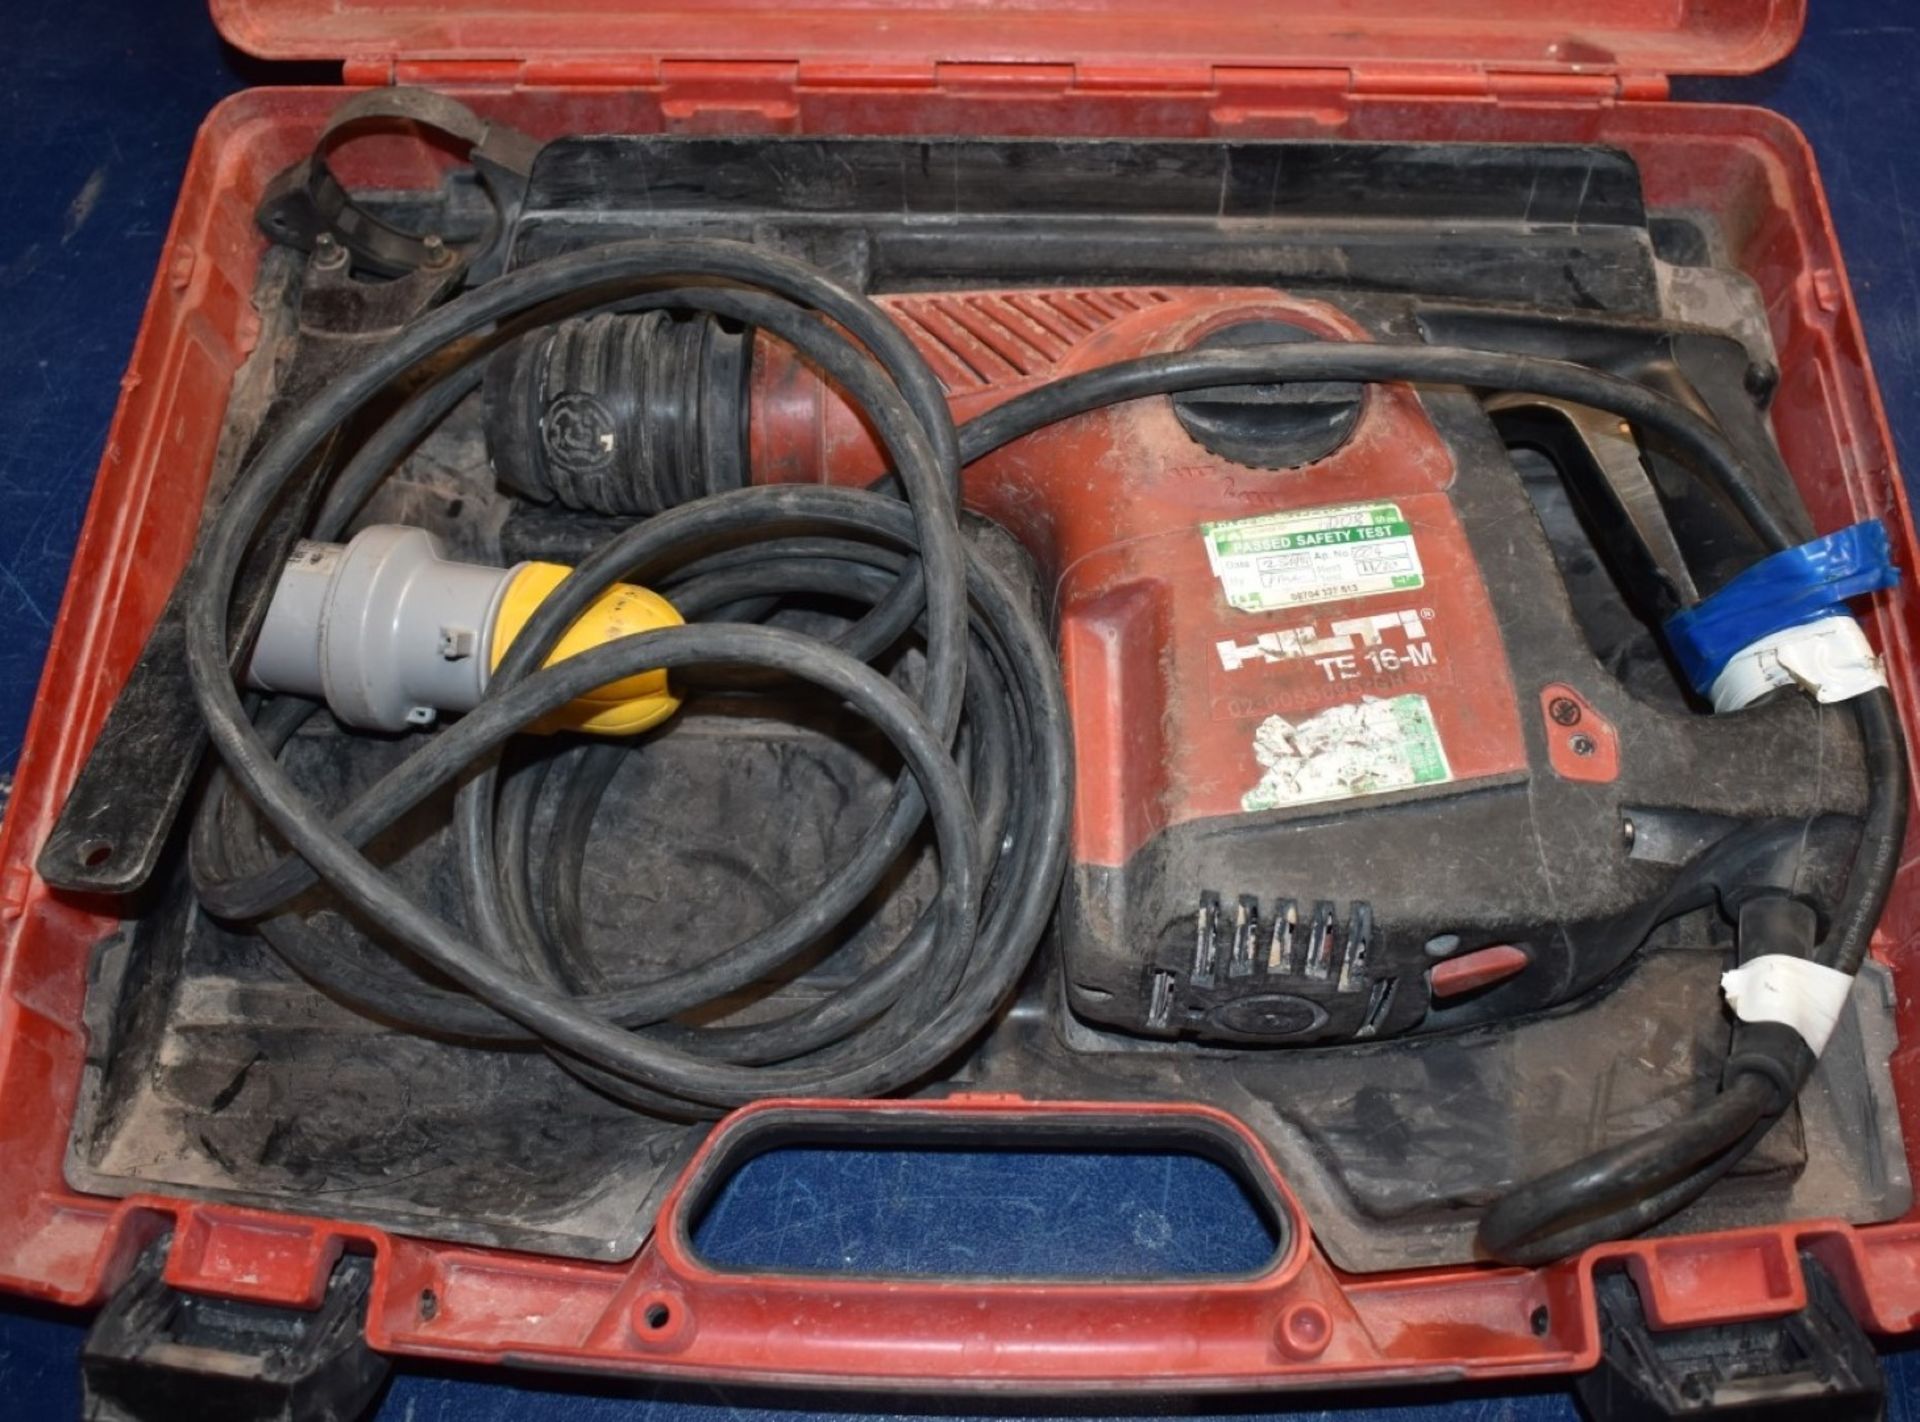 1 x Hilti TE 16M 110v Hammer Drill With Carry Case PME134 - Image 3 of 7